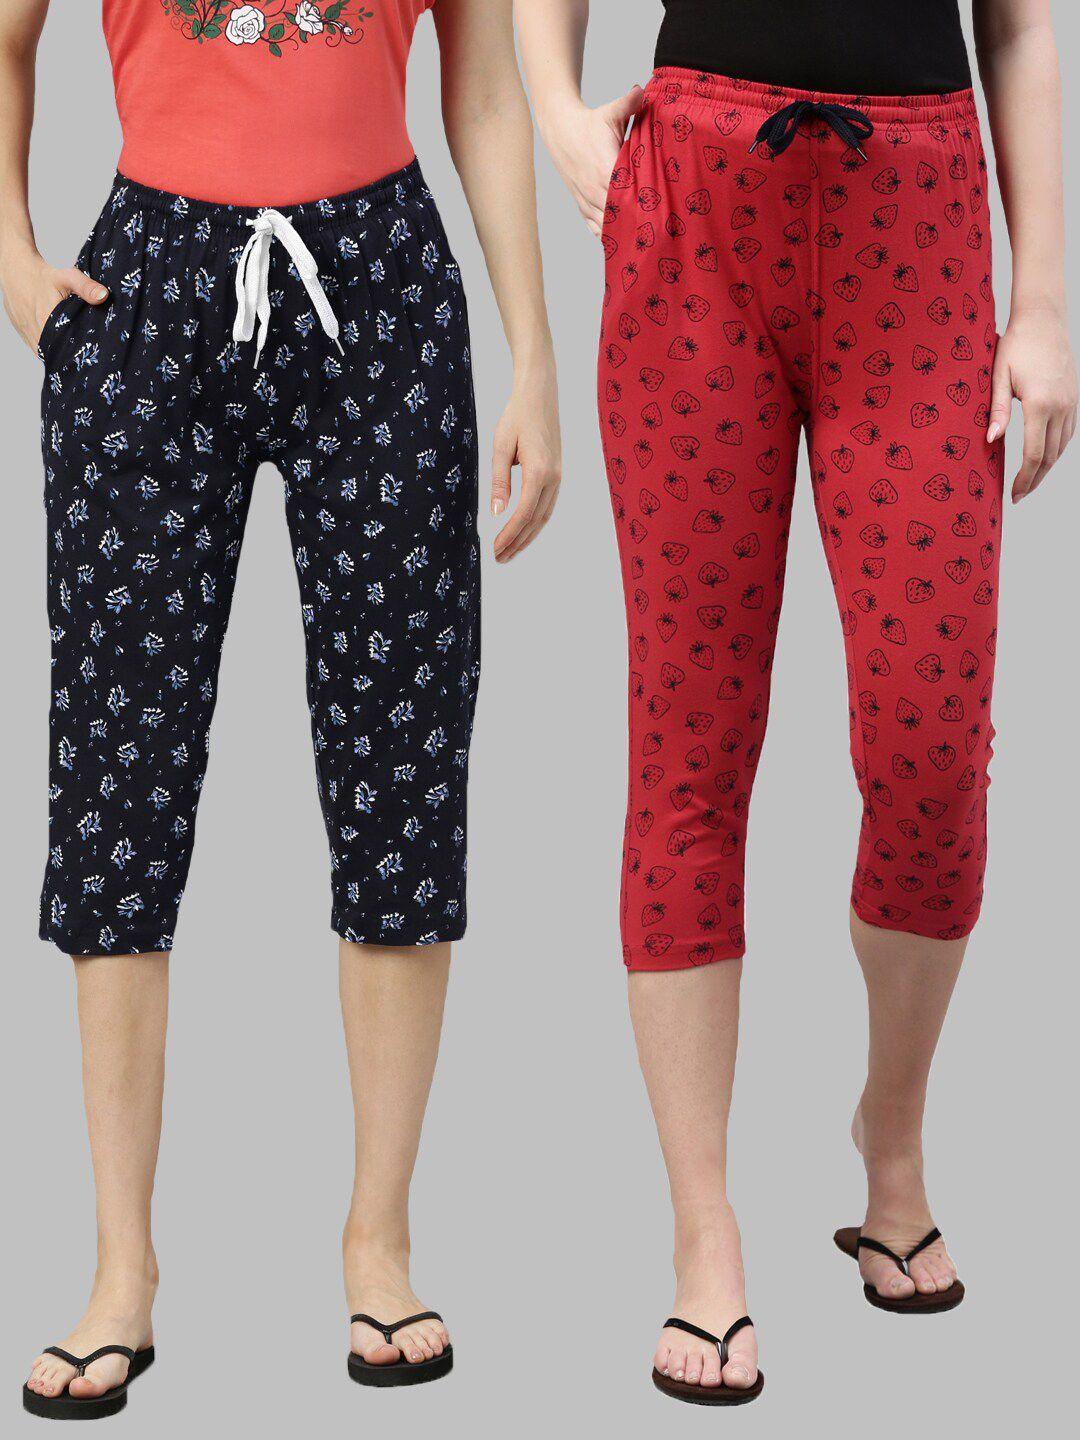 kryptic pack of 2 navy blue & red printed cotton capris